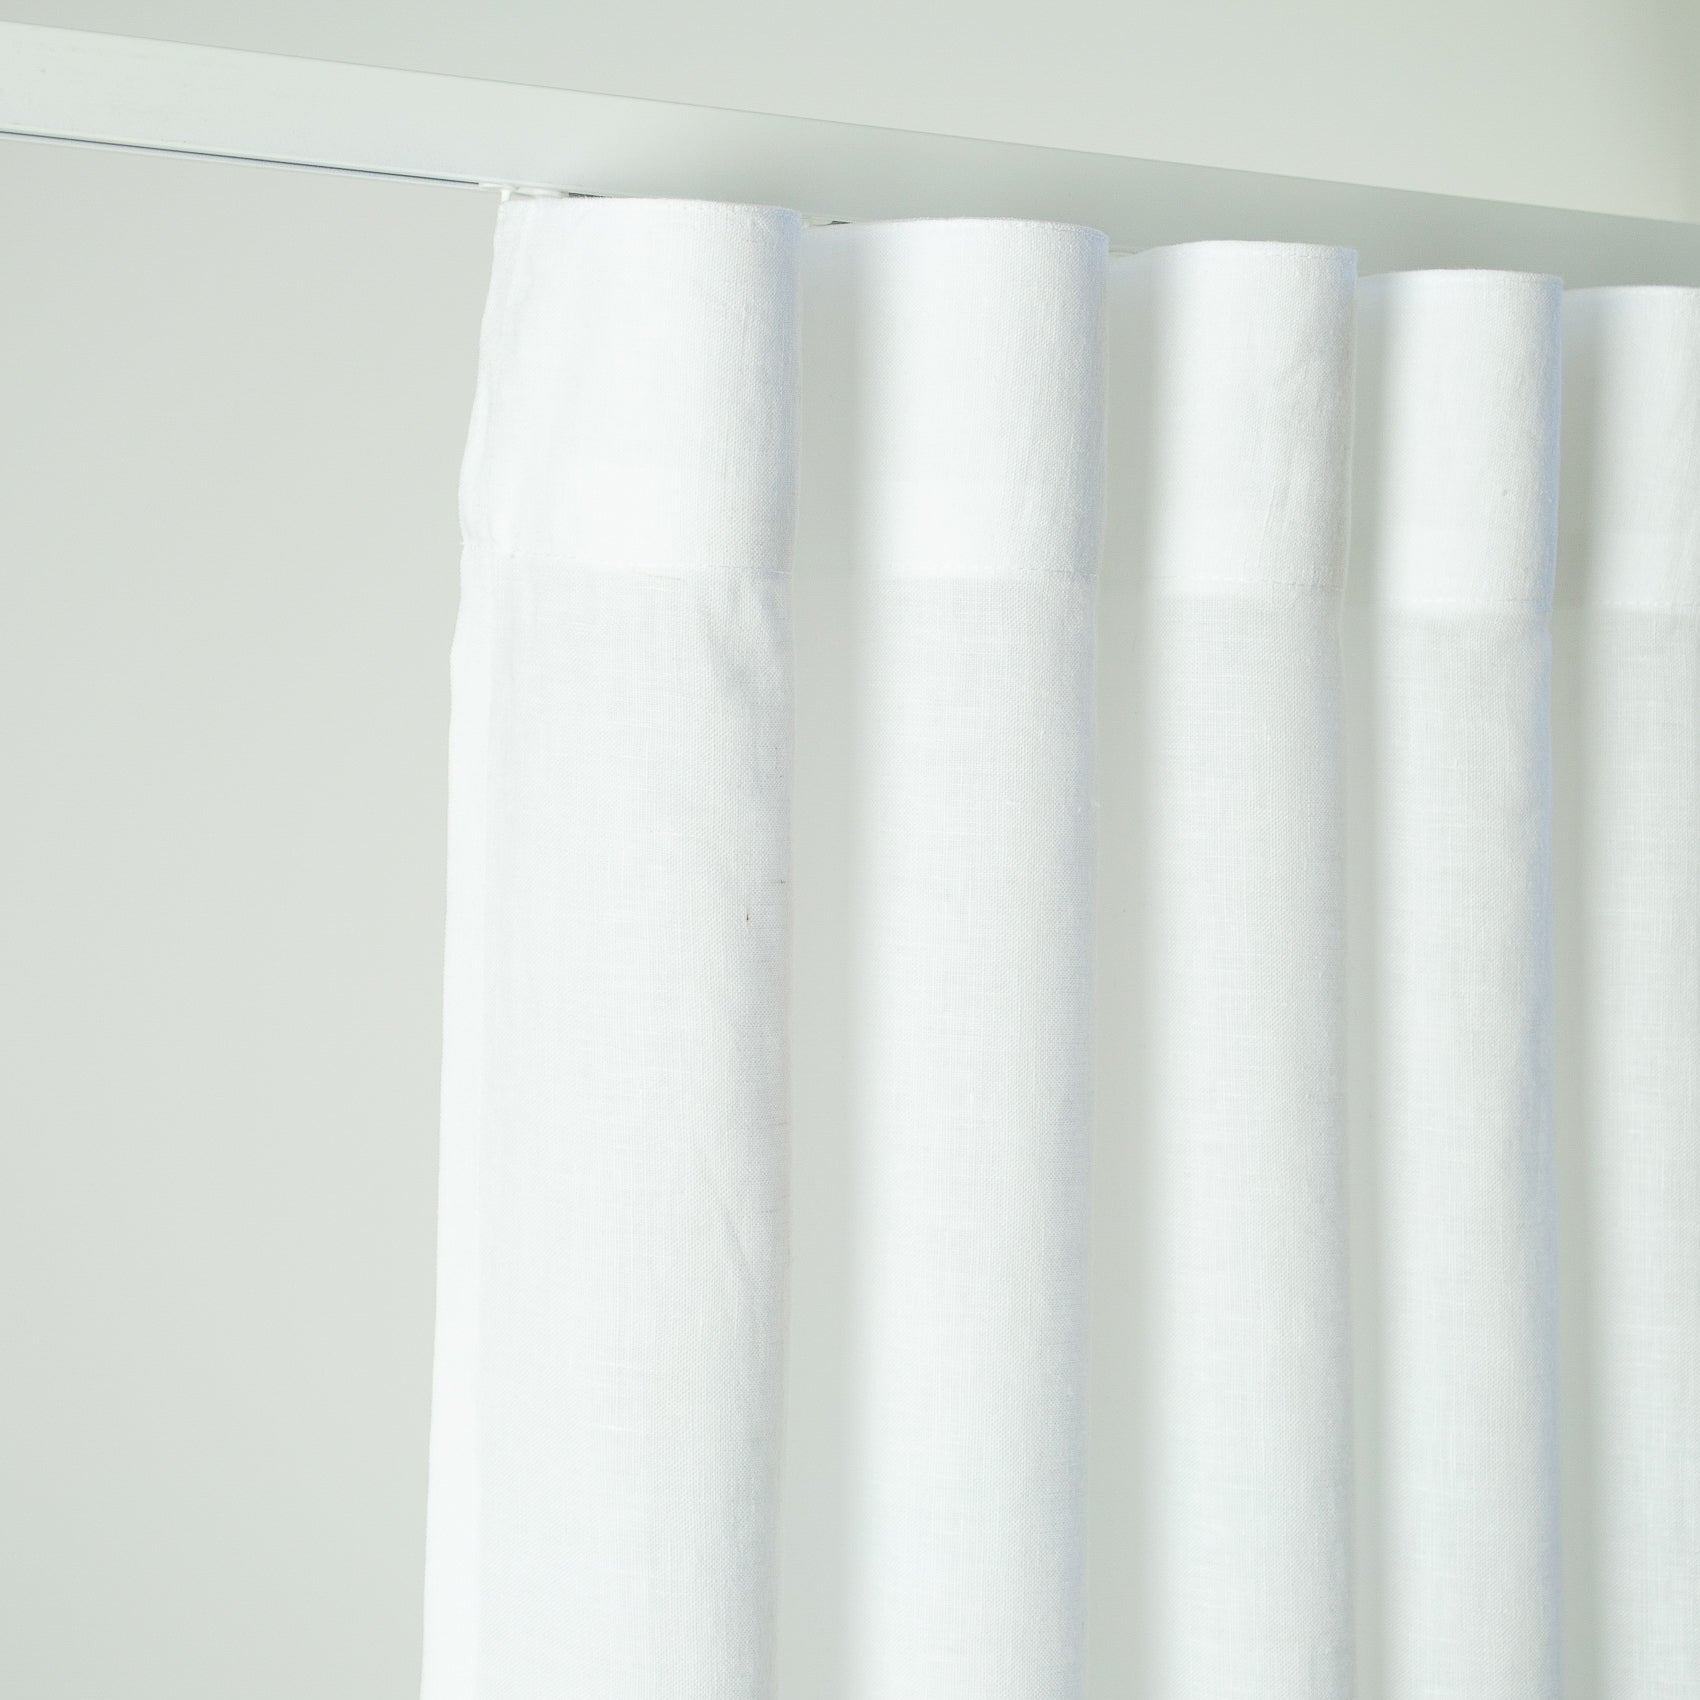 Unlined Curtain in White Color